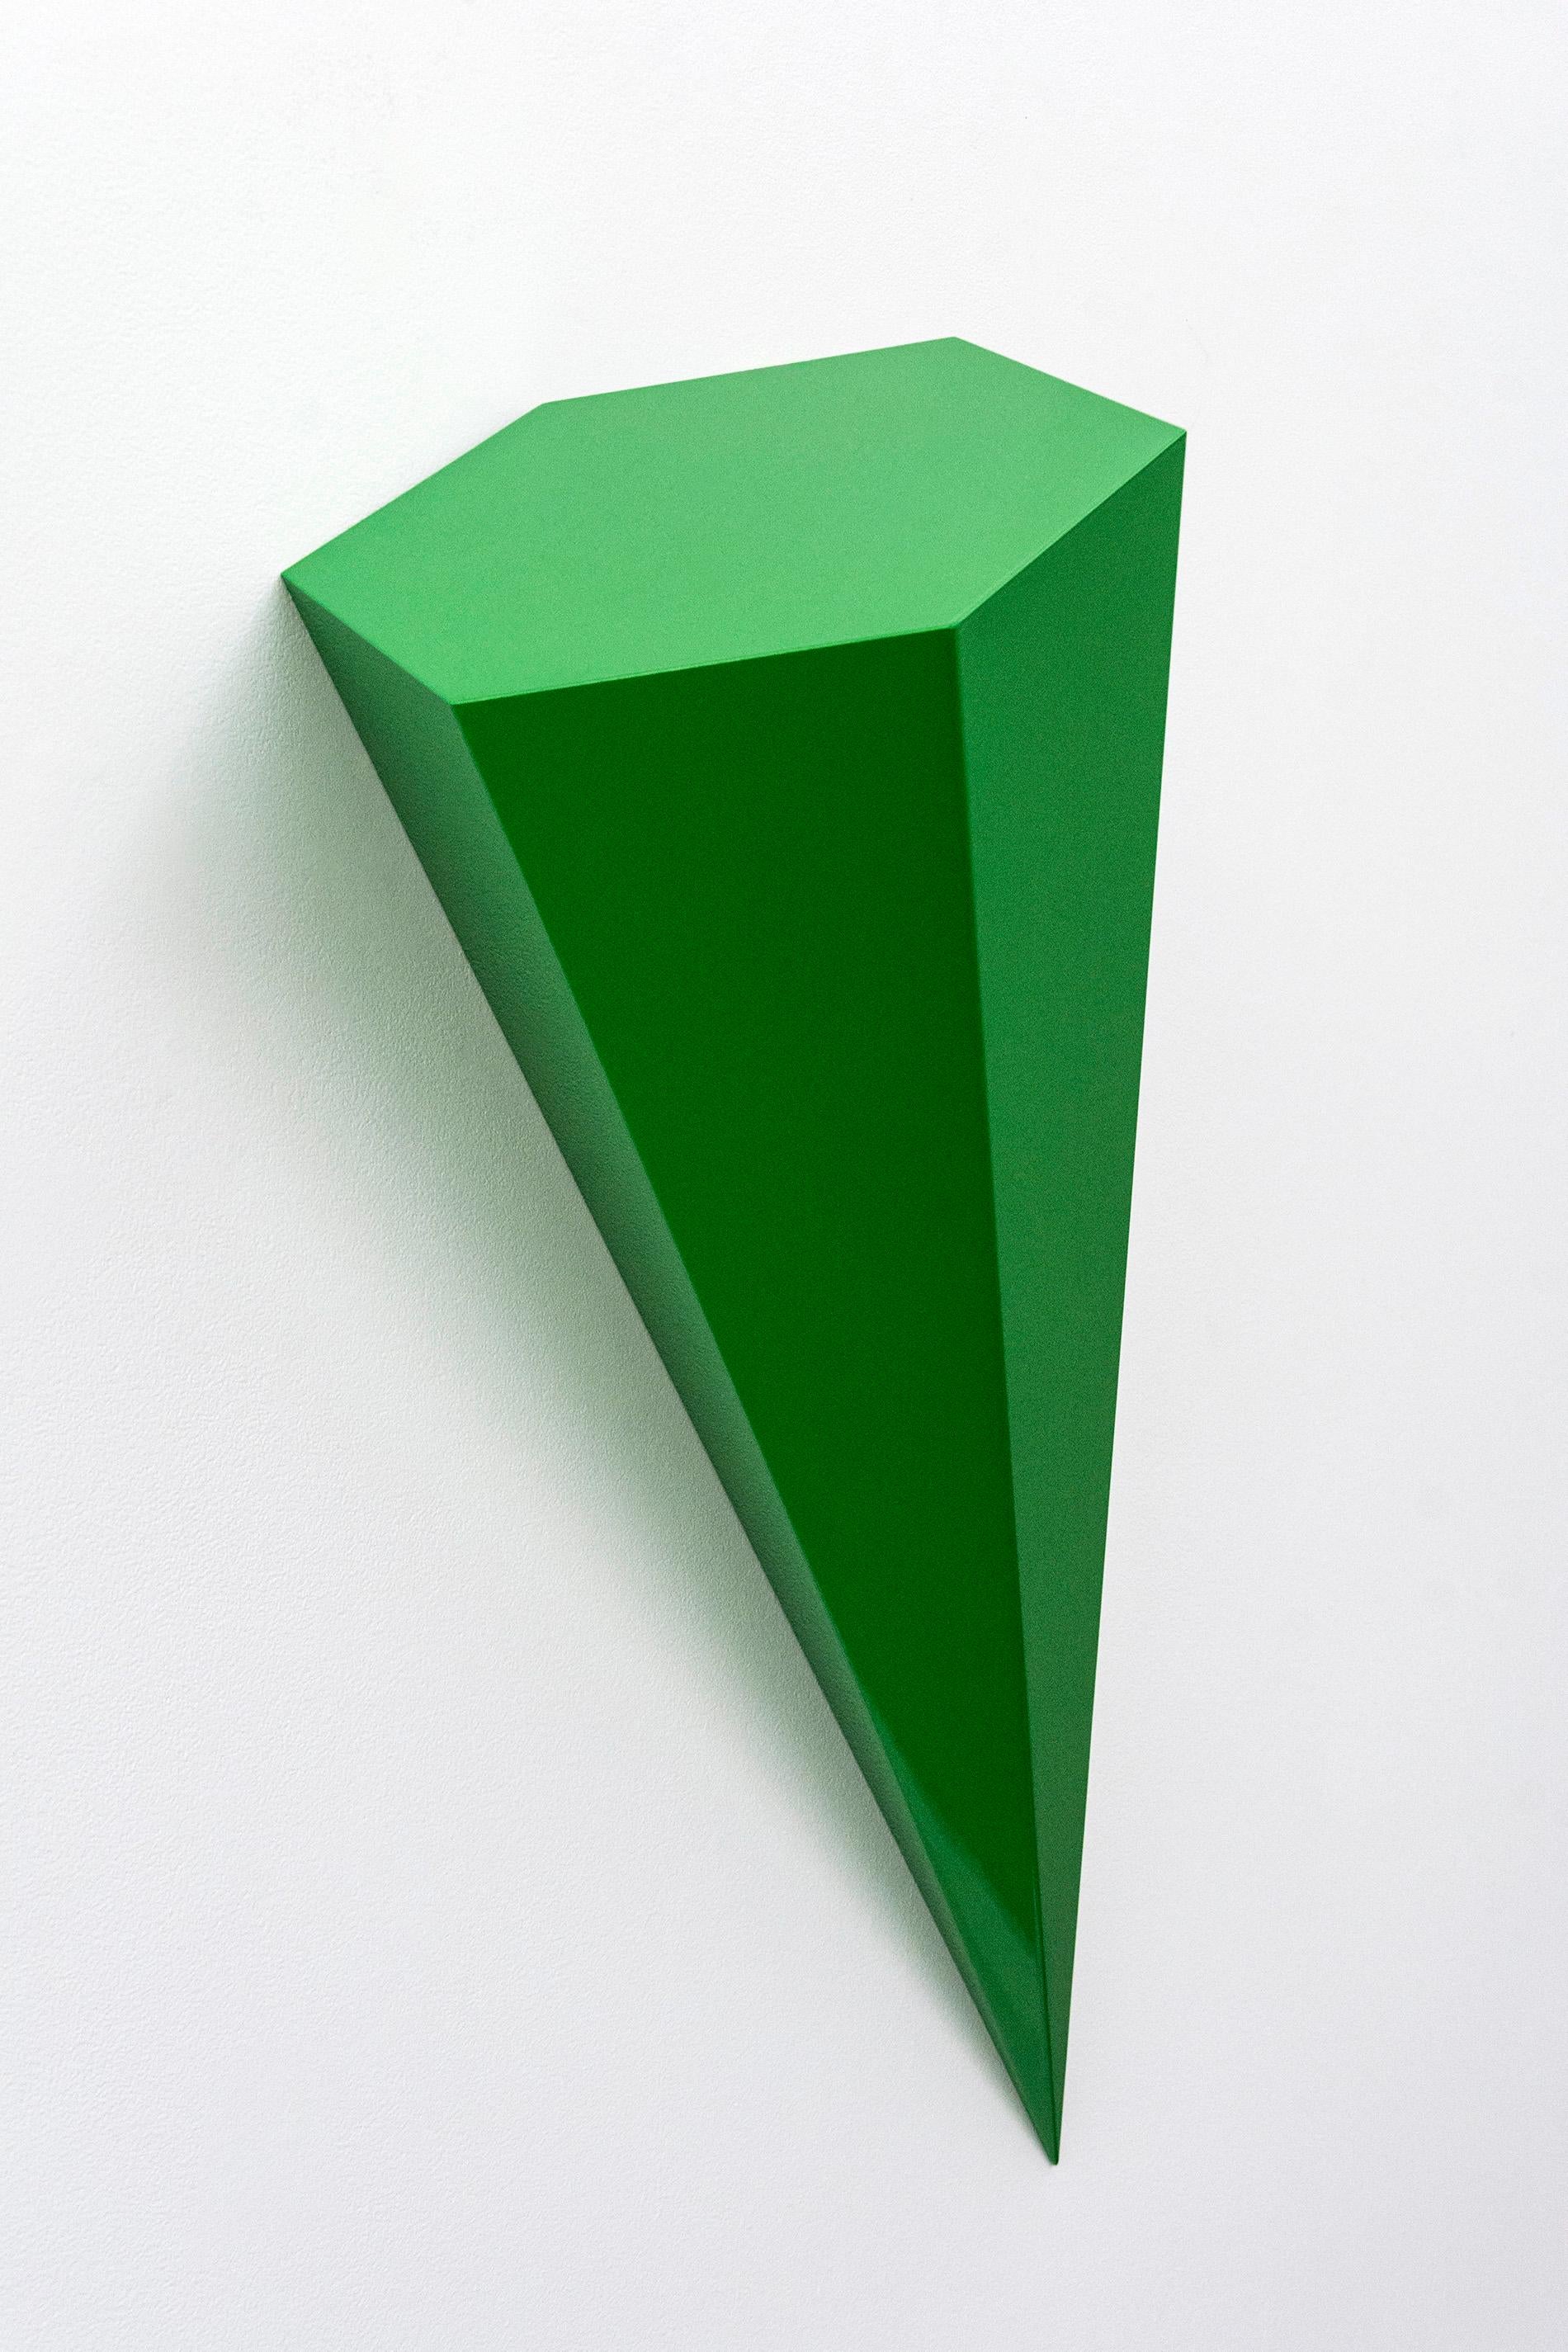 On Point - bright, glossy, green, smooth surfaced, abstract, wall sculpture - Painting by Lori Cozen-Geller